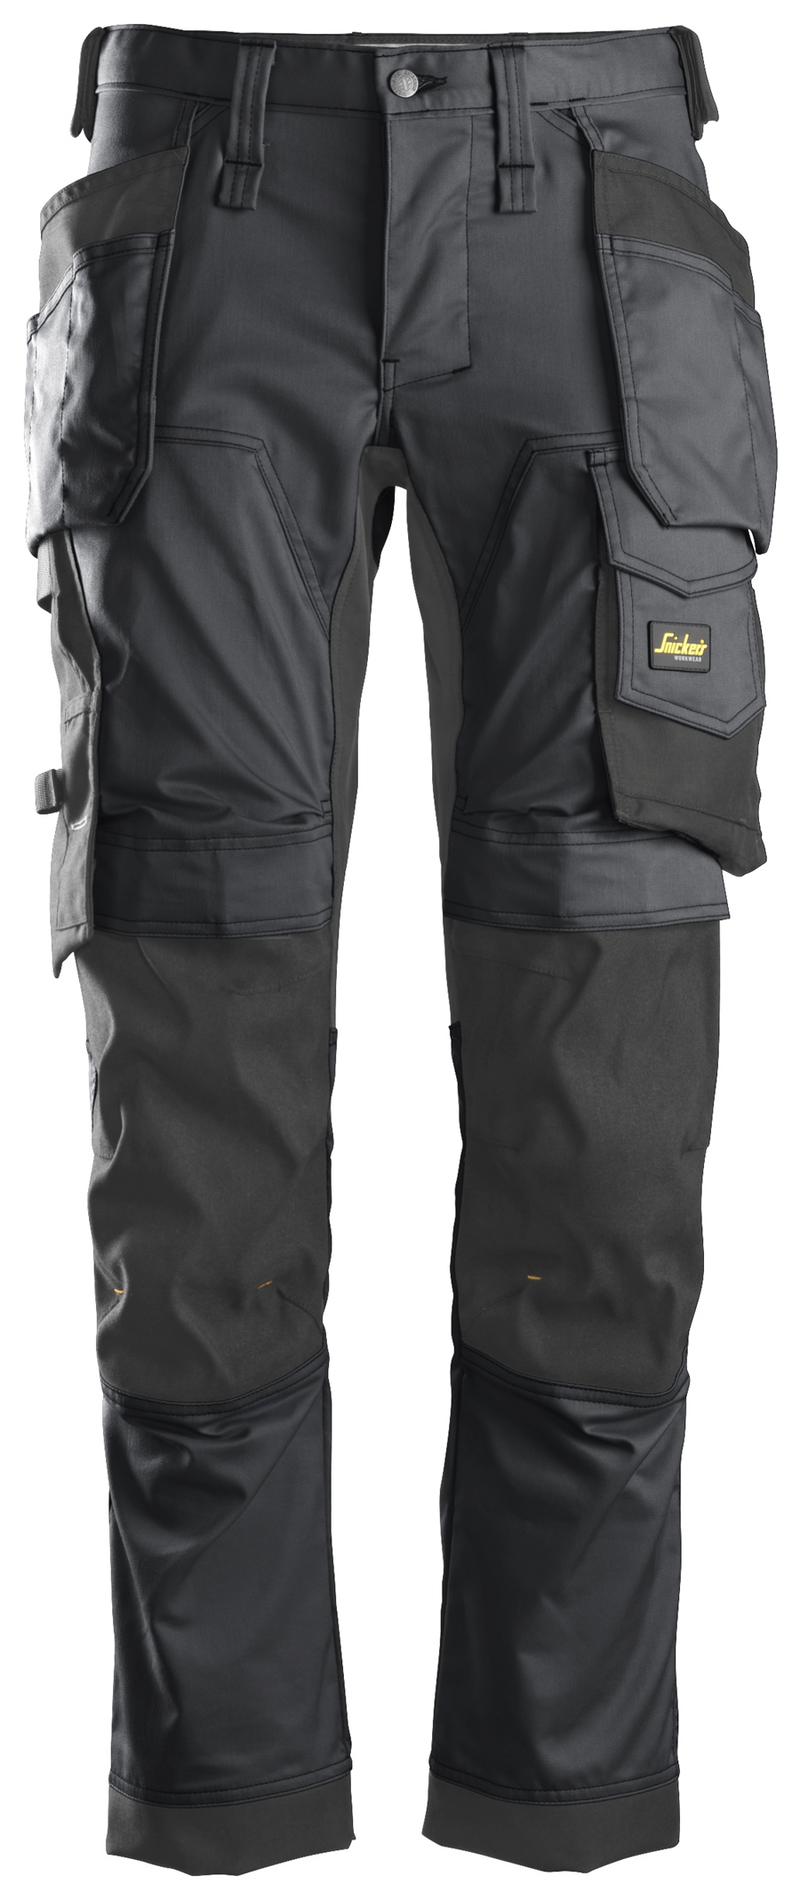 Snickers 6241 Slim fit Stretch Trousers Holster Pockets